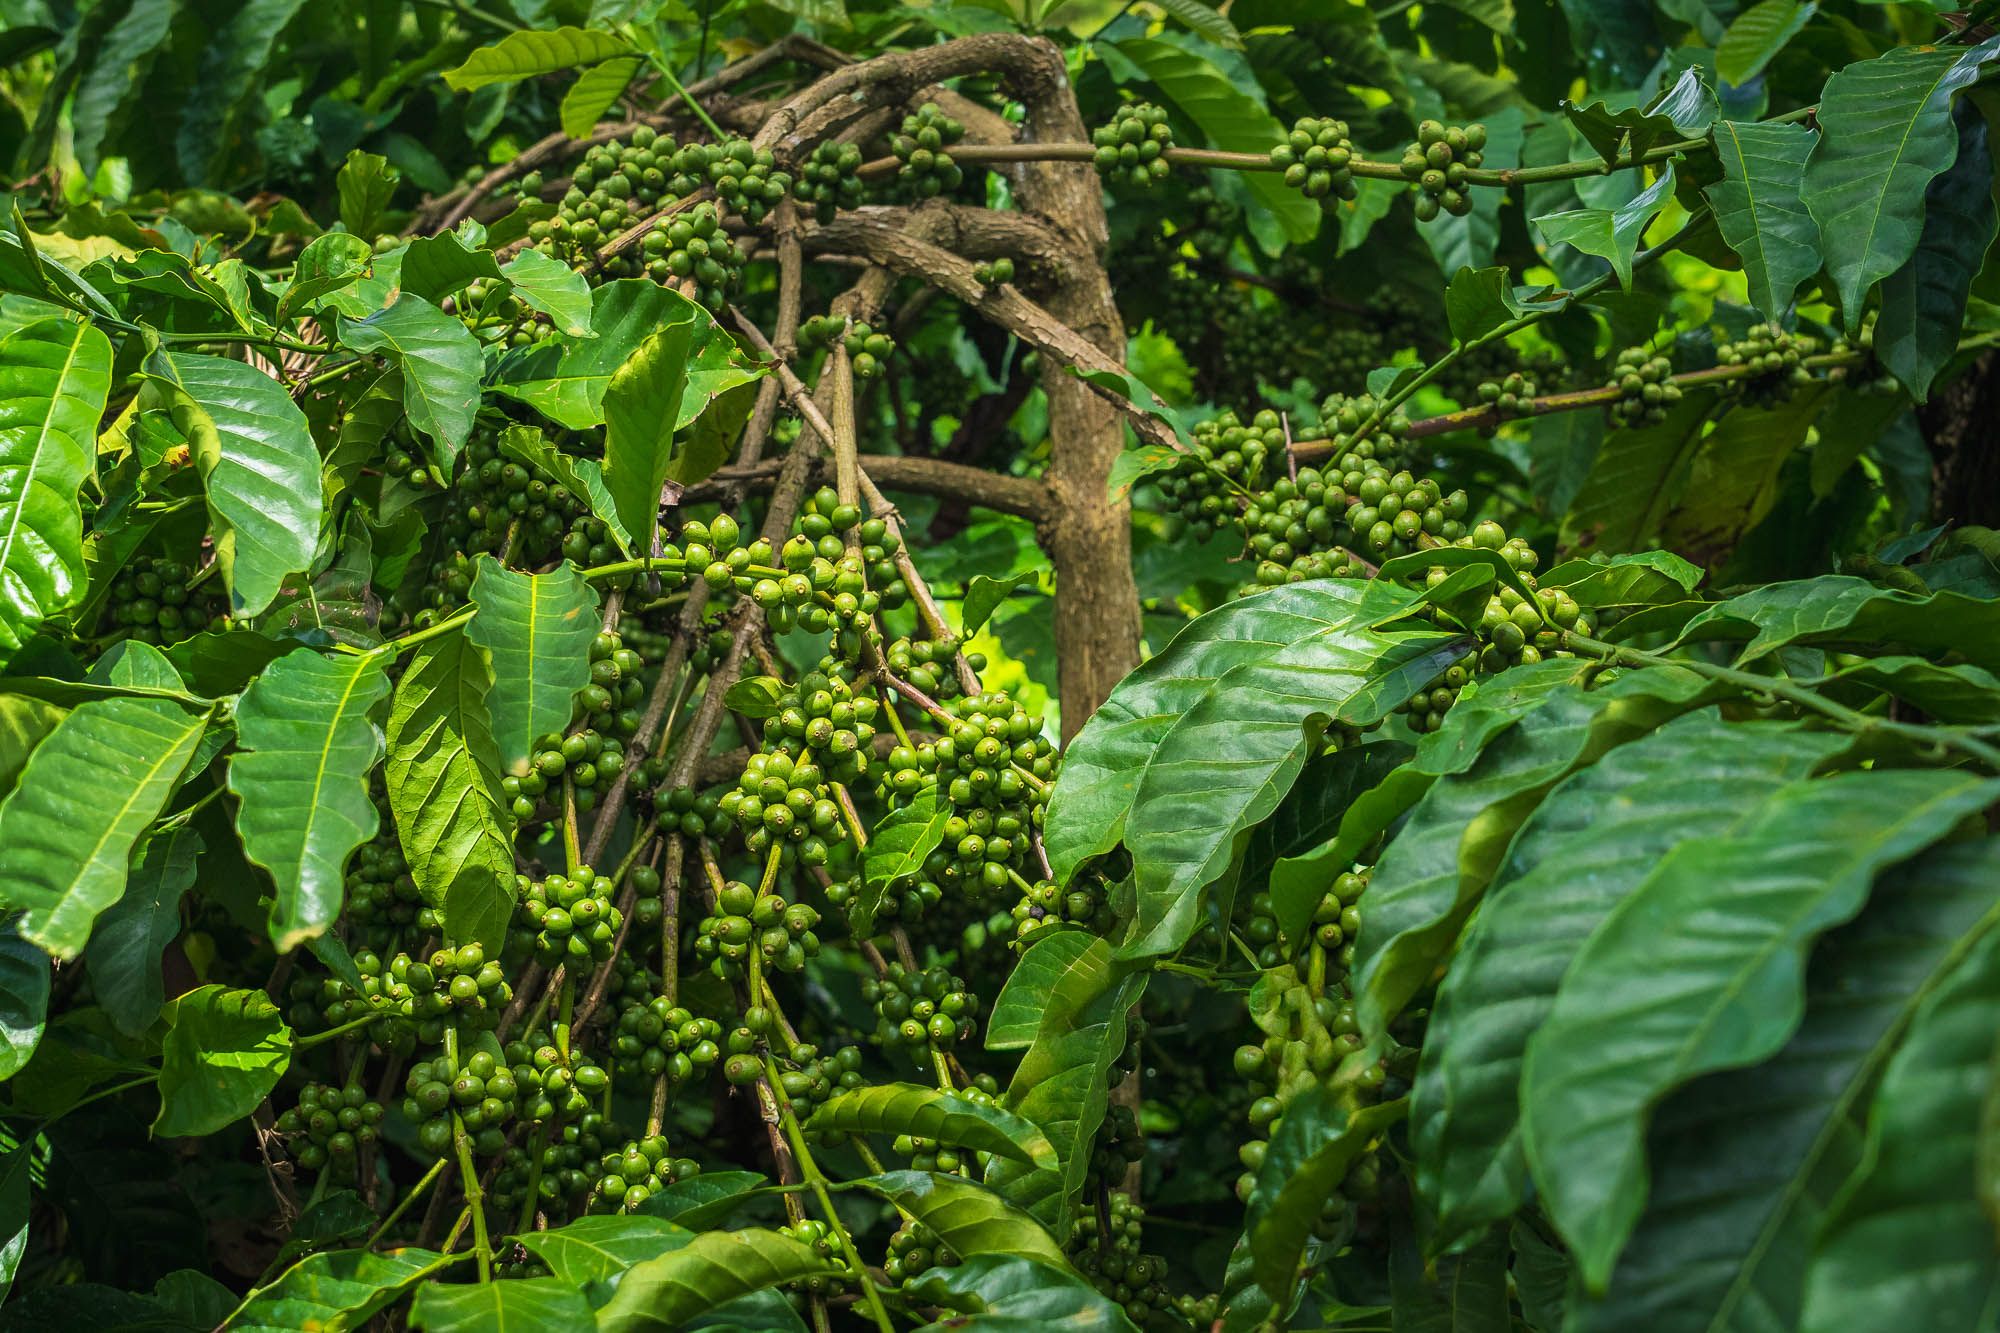 Robusta coffee beans, two months before harvest. Photo by Shashikiran Mullur